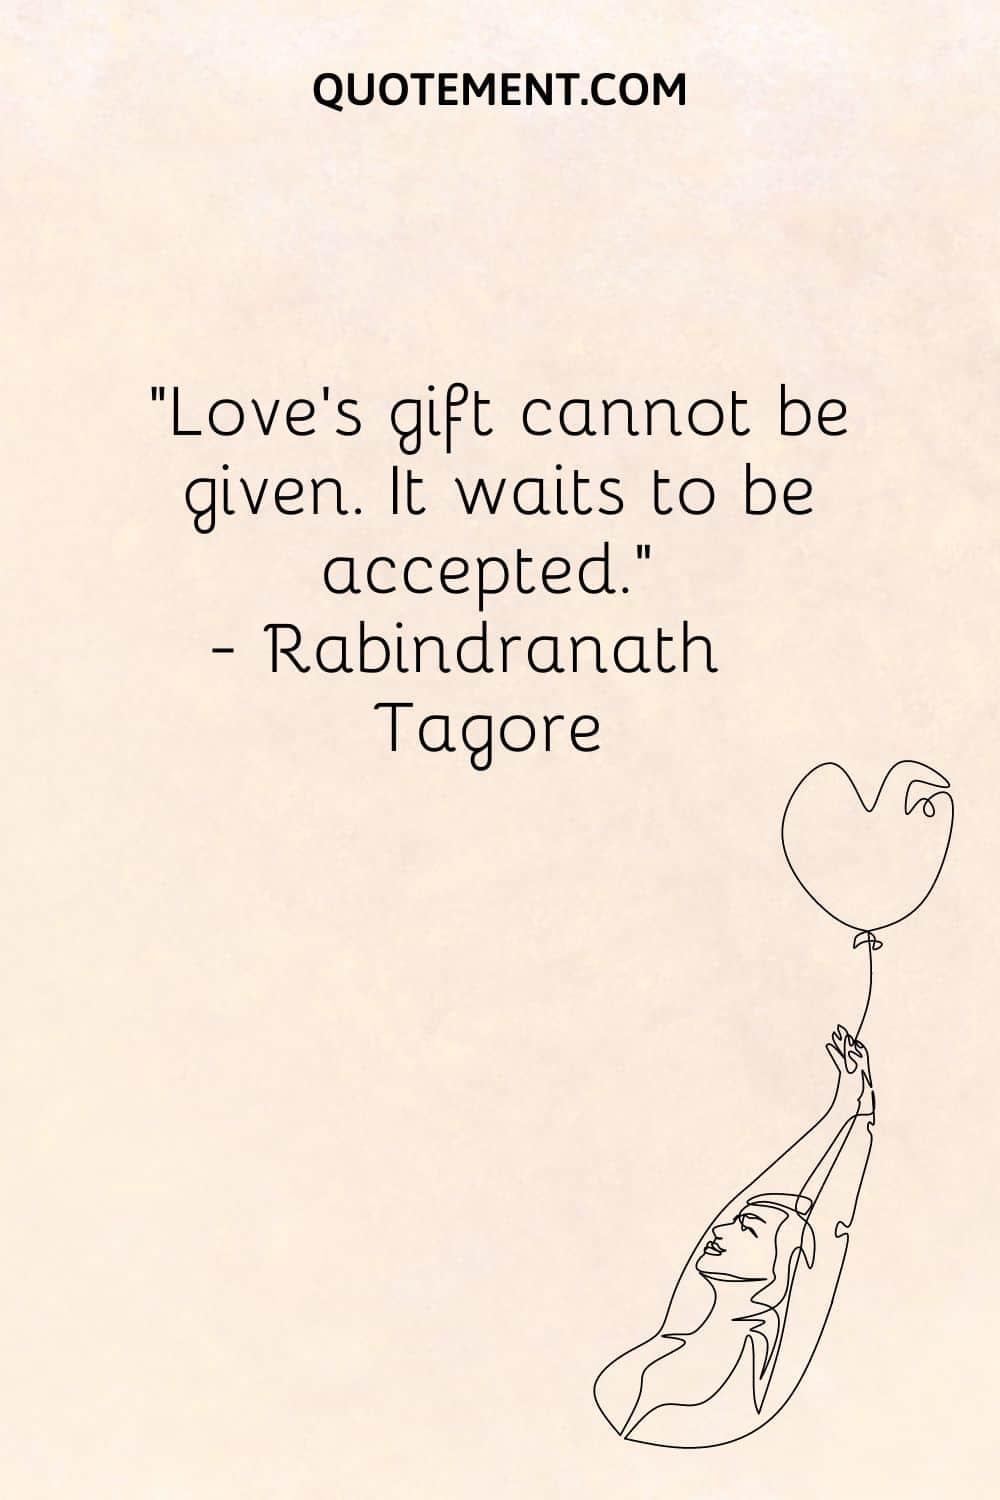 Love’s gift cannot be given. It waits to be accepted